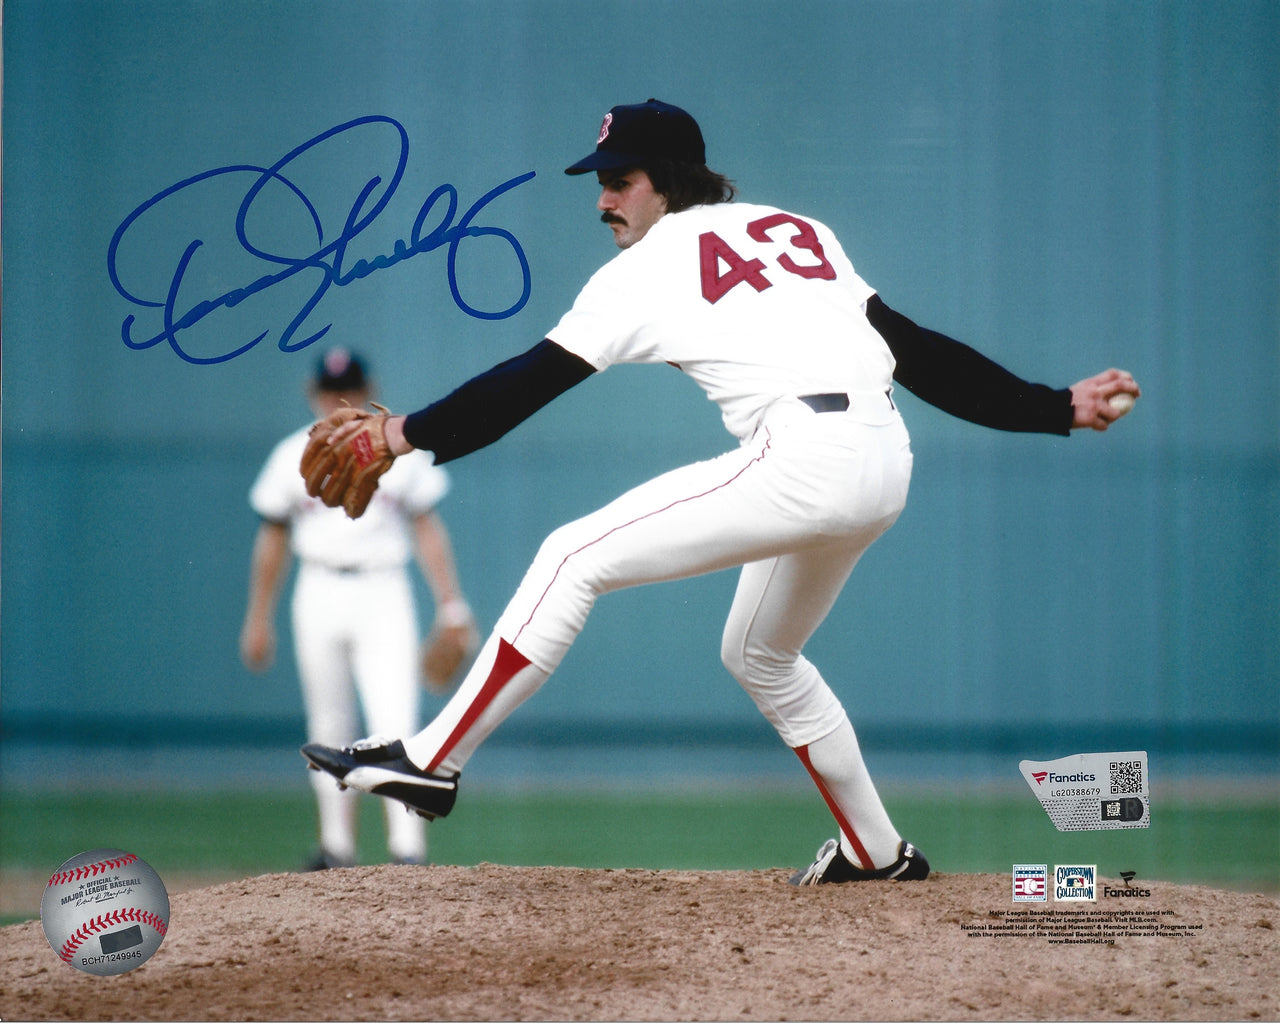 Dennis Eckersley in Action Boston Red Sox Autographed 8" x 10" Baseball Photo - Dynasty Sports & Framing 